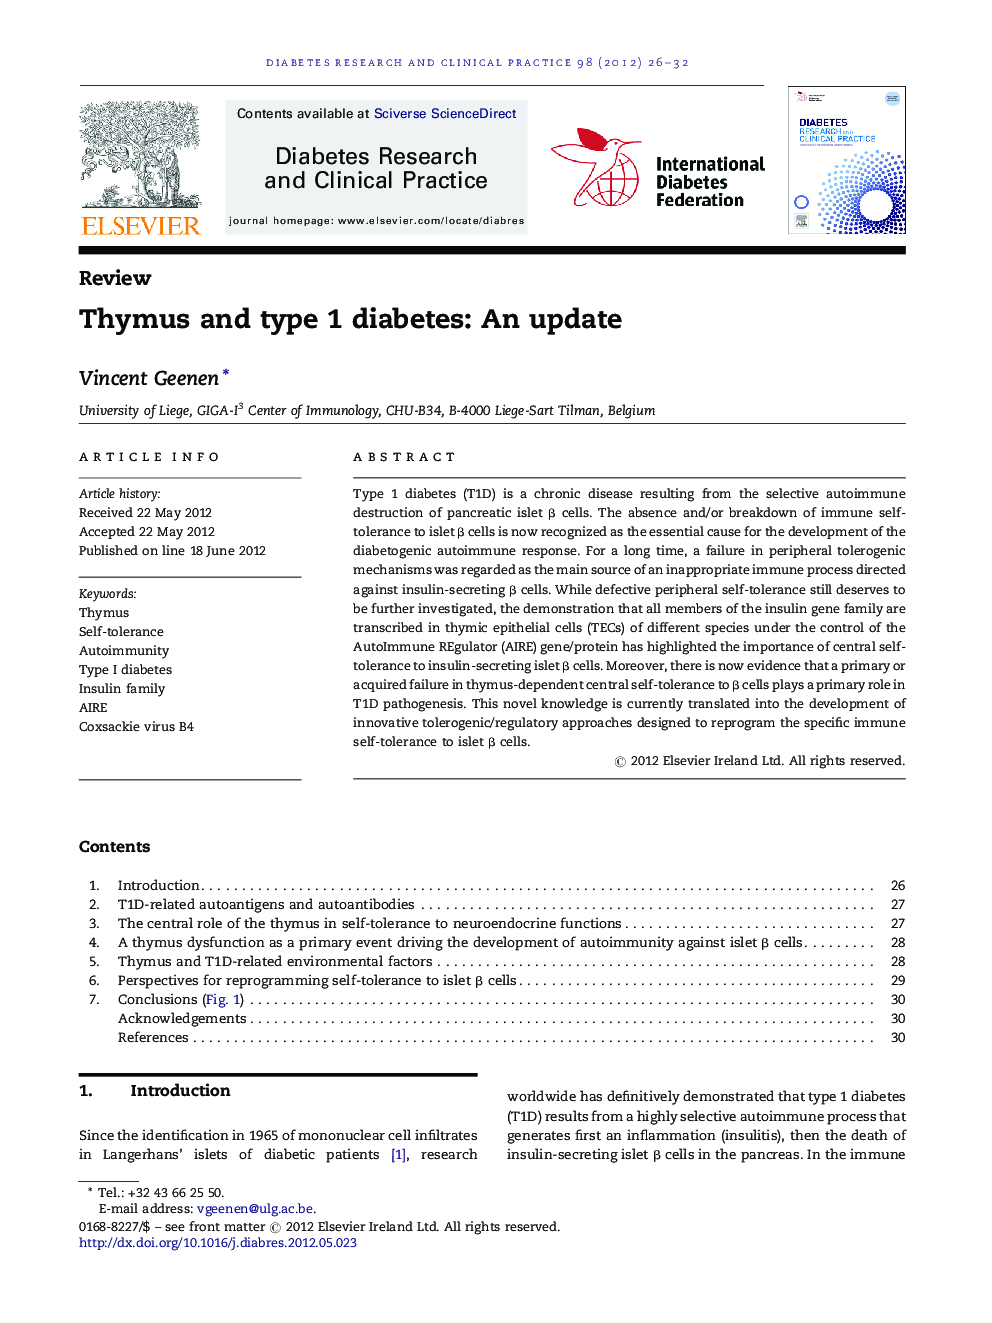 Thymus and type 1 diabetes: An update